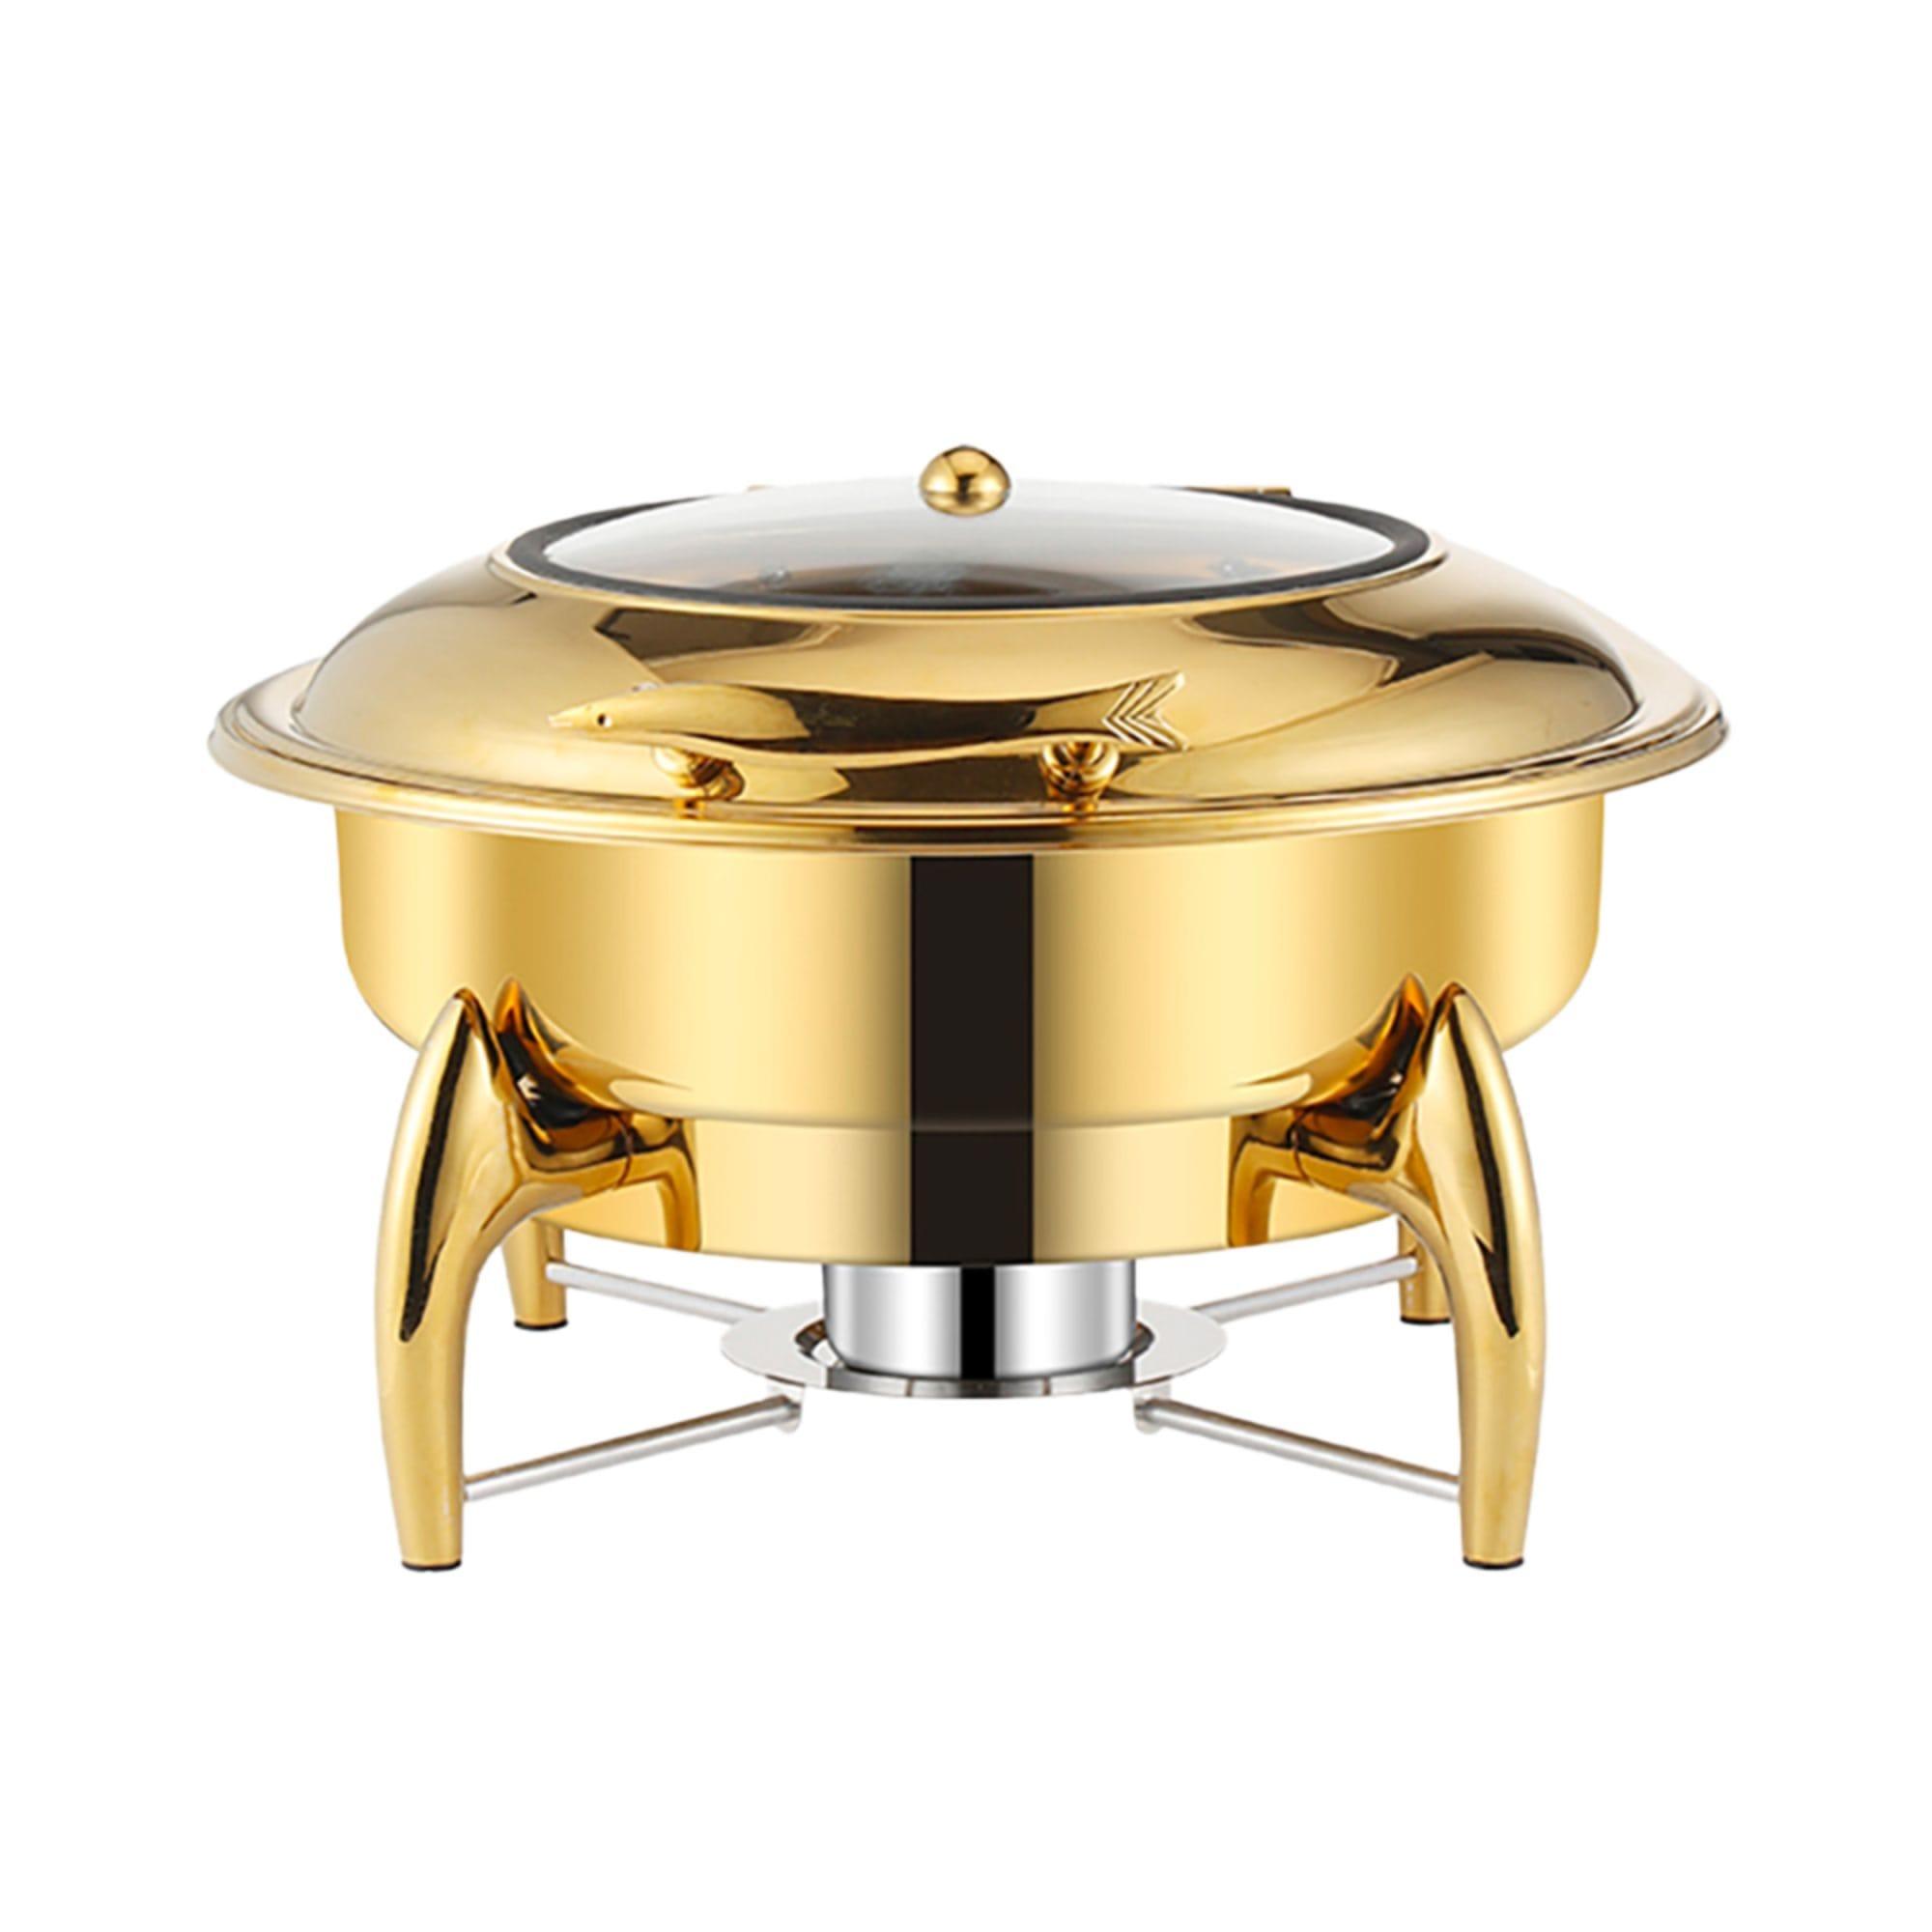 Soga Round Stainless Steel Chafing Dish with Top Lid Gold Image 1